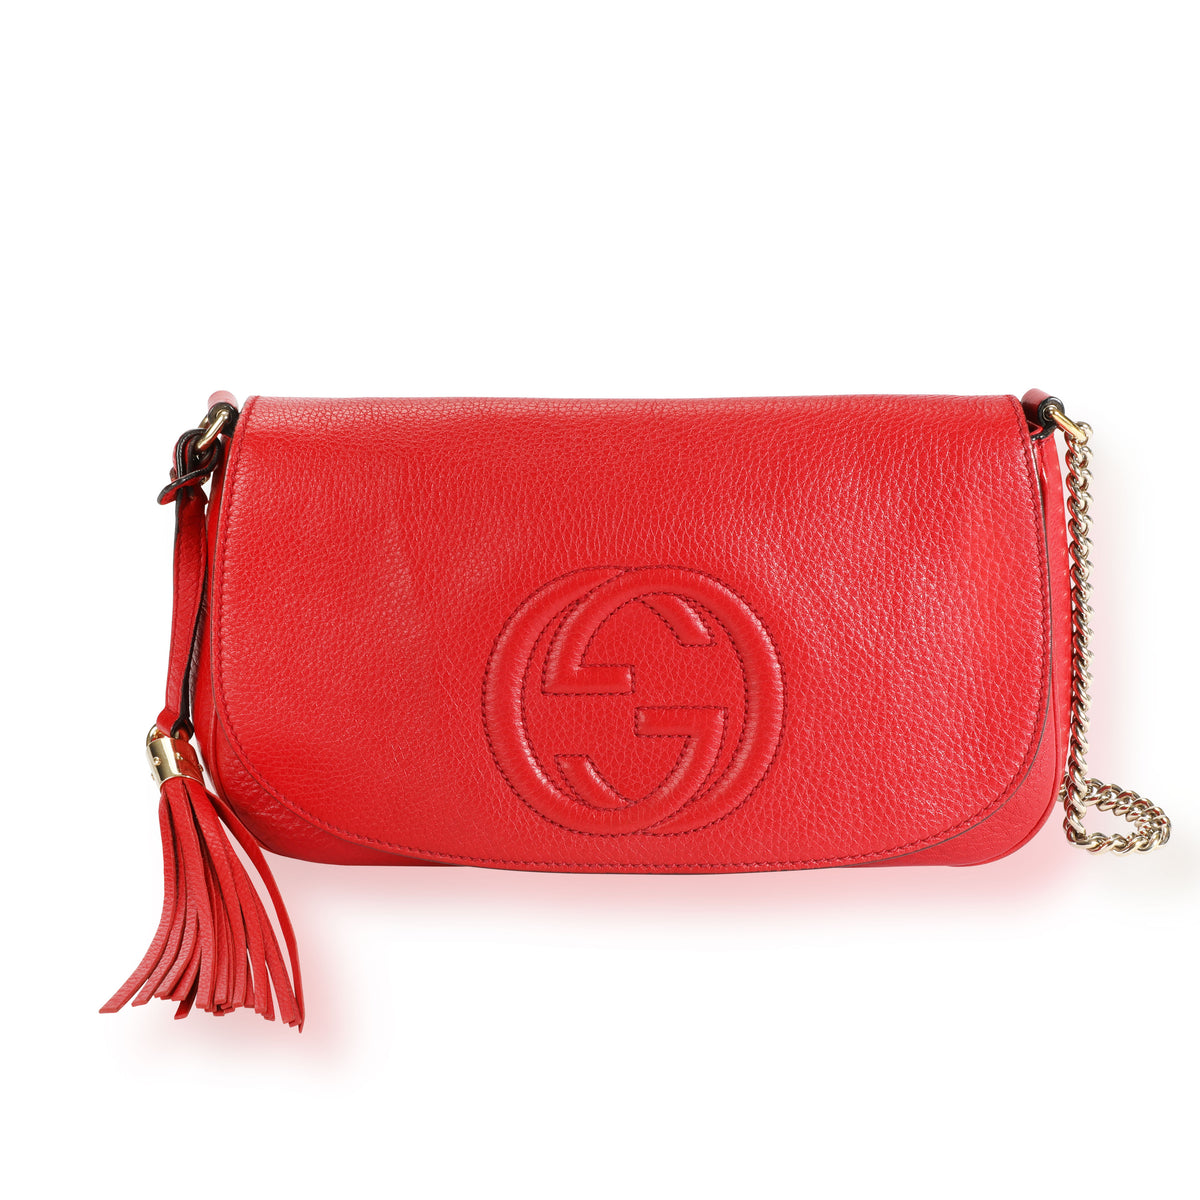 Gucci Red Pebbled Leather Medium Soho Chain Bag